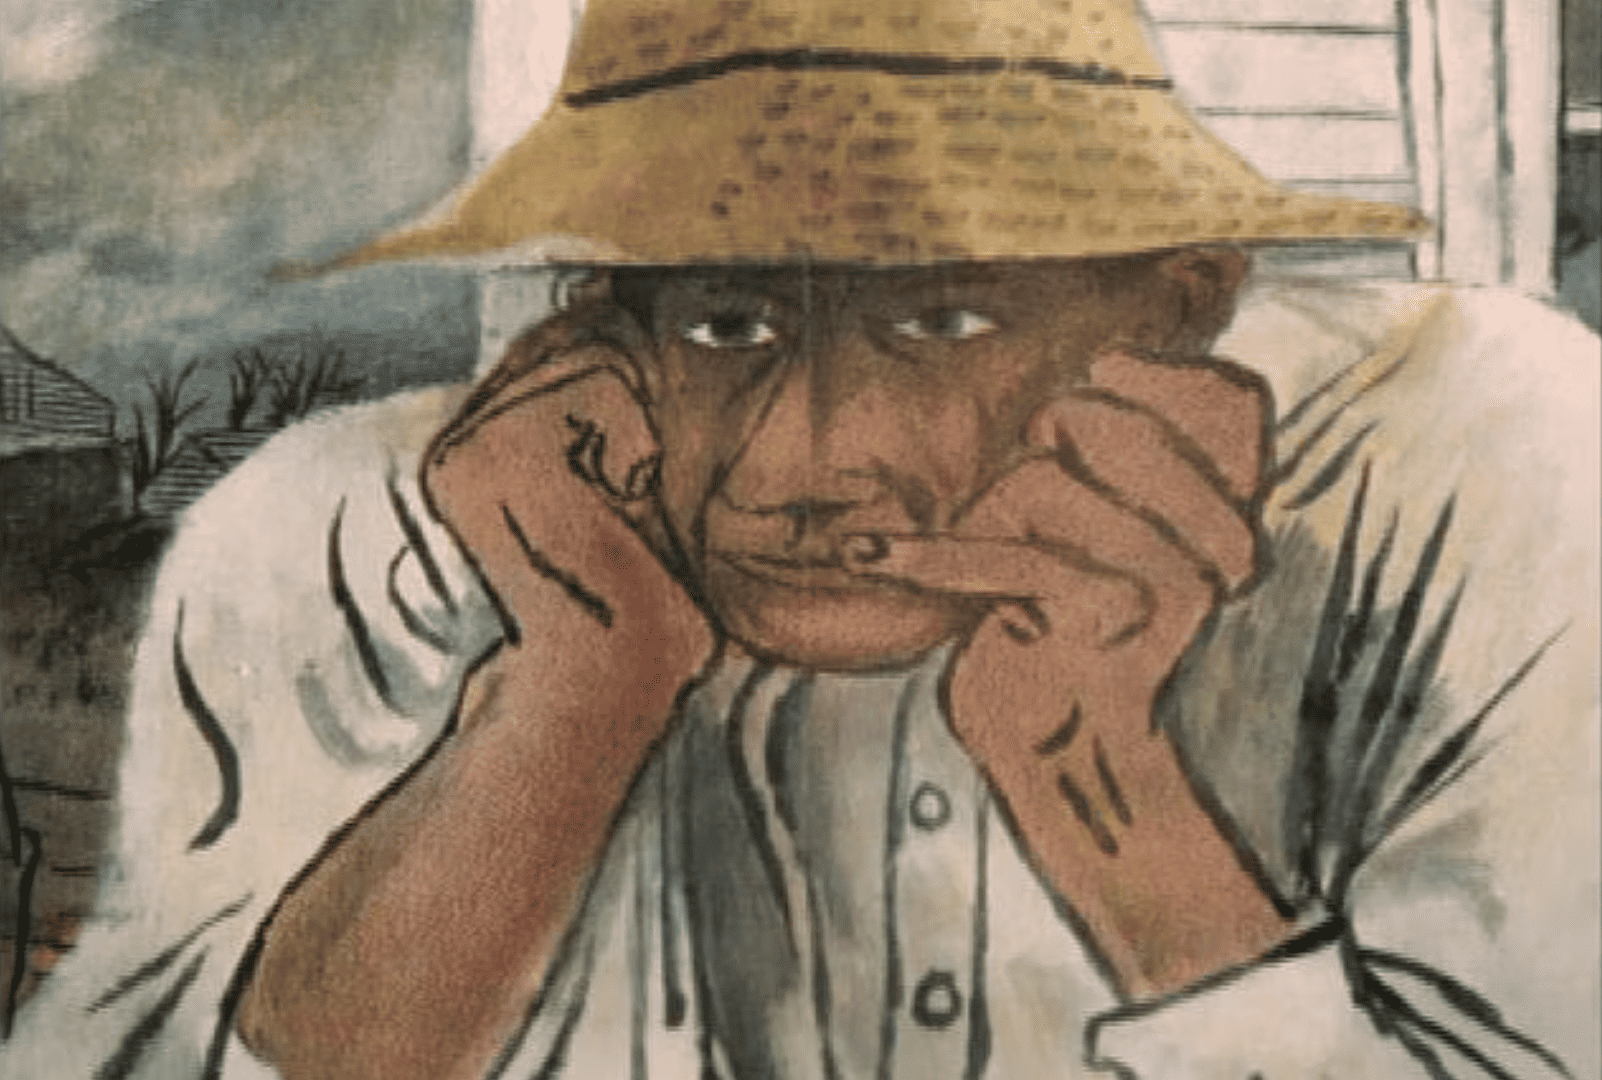 detail of painting by Ben Shahn